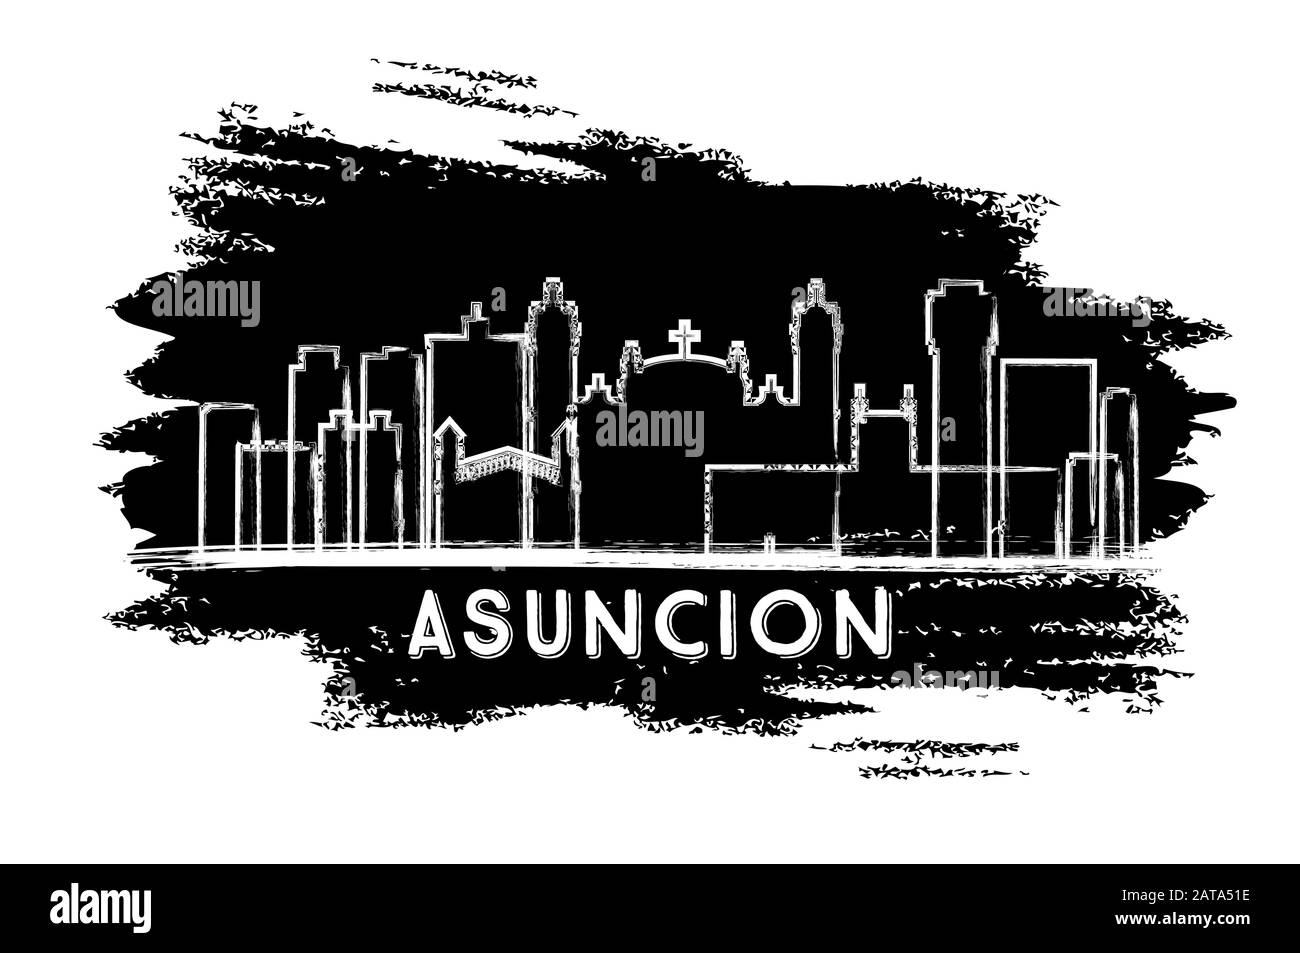 Asuncion Paraguay City Skyline Silhouette. Hand Drawn Sketch. Vector Illustration. Business Travel and Tourism Concept with Modern Architecture. Stock Vector